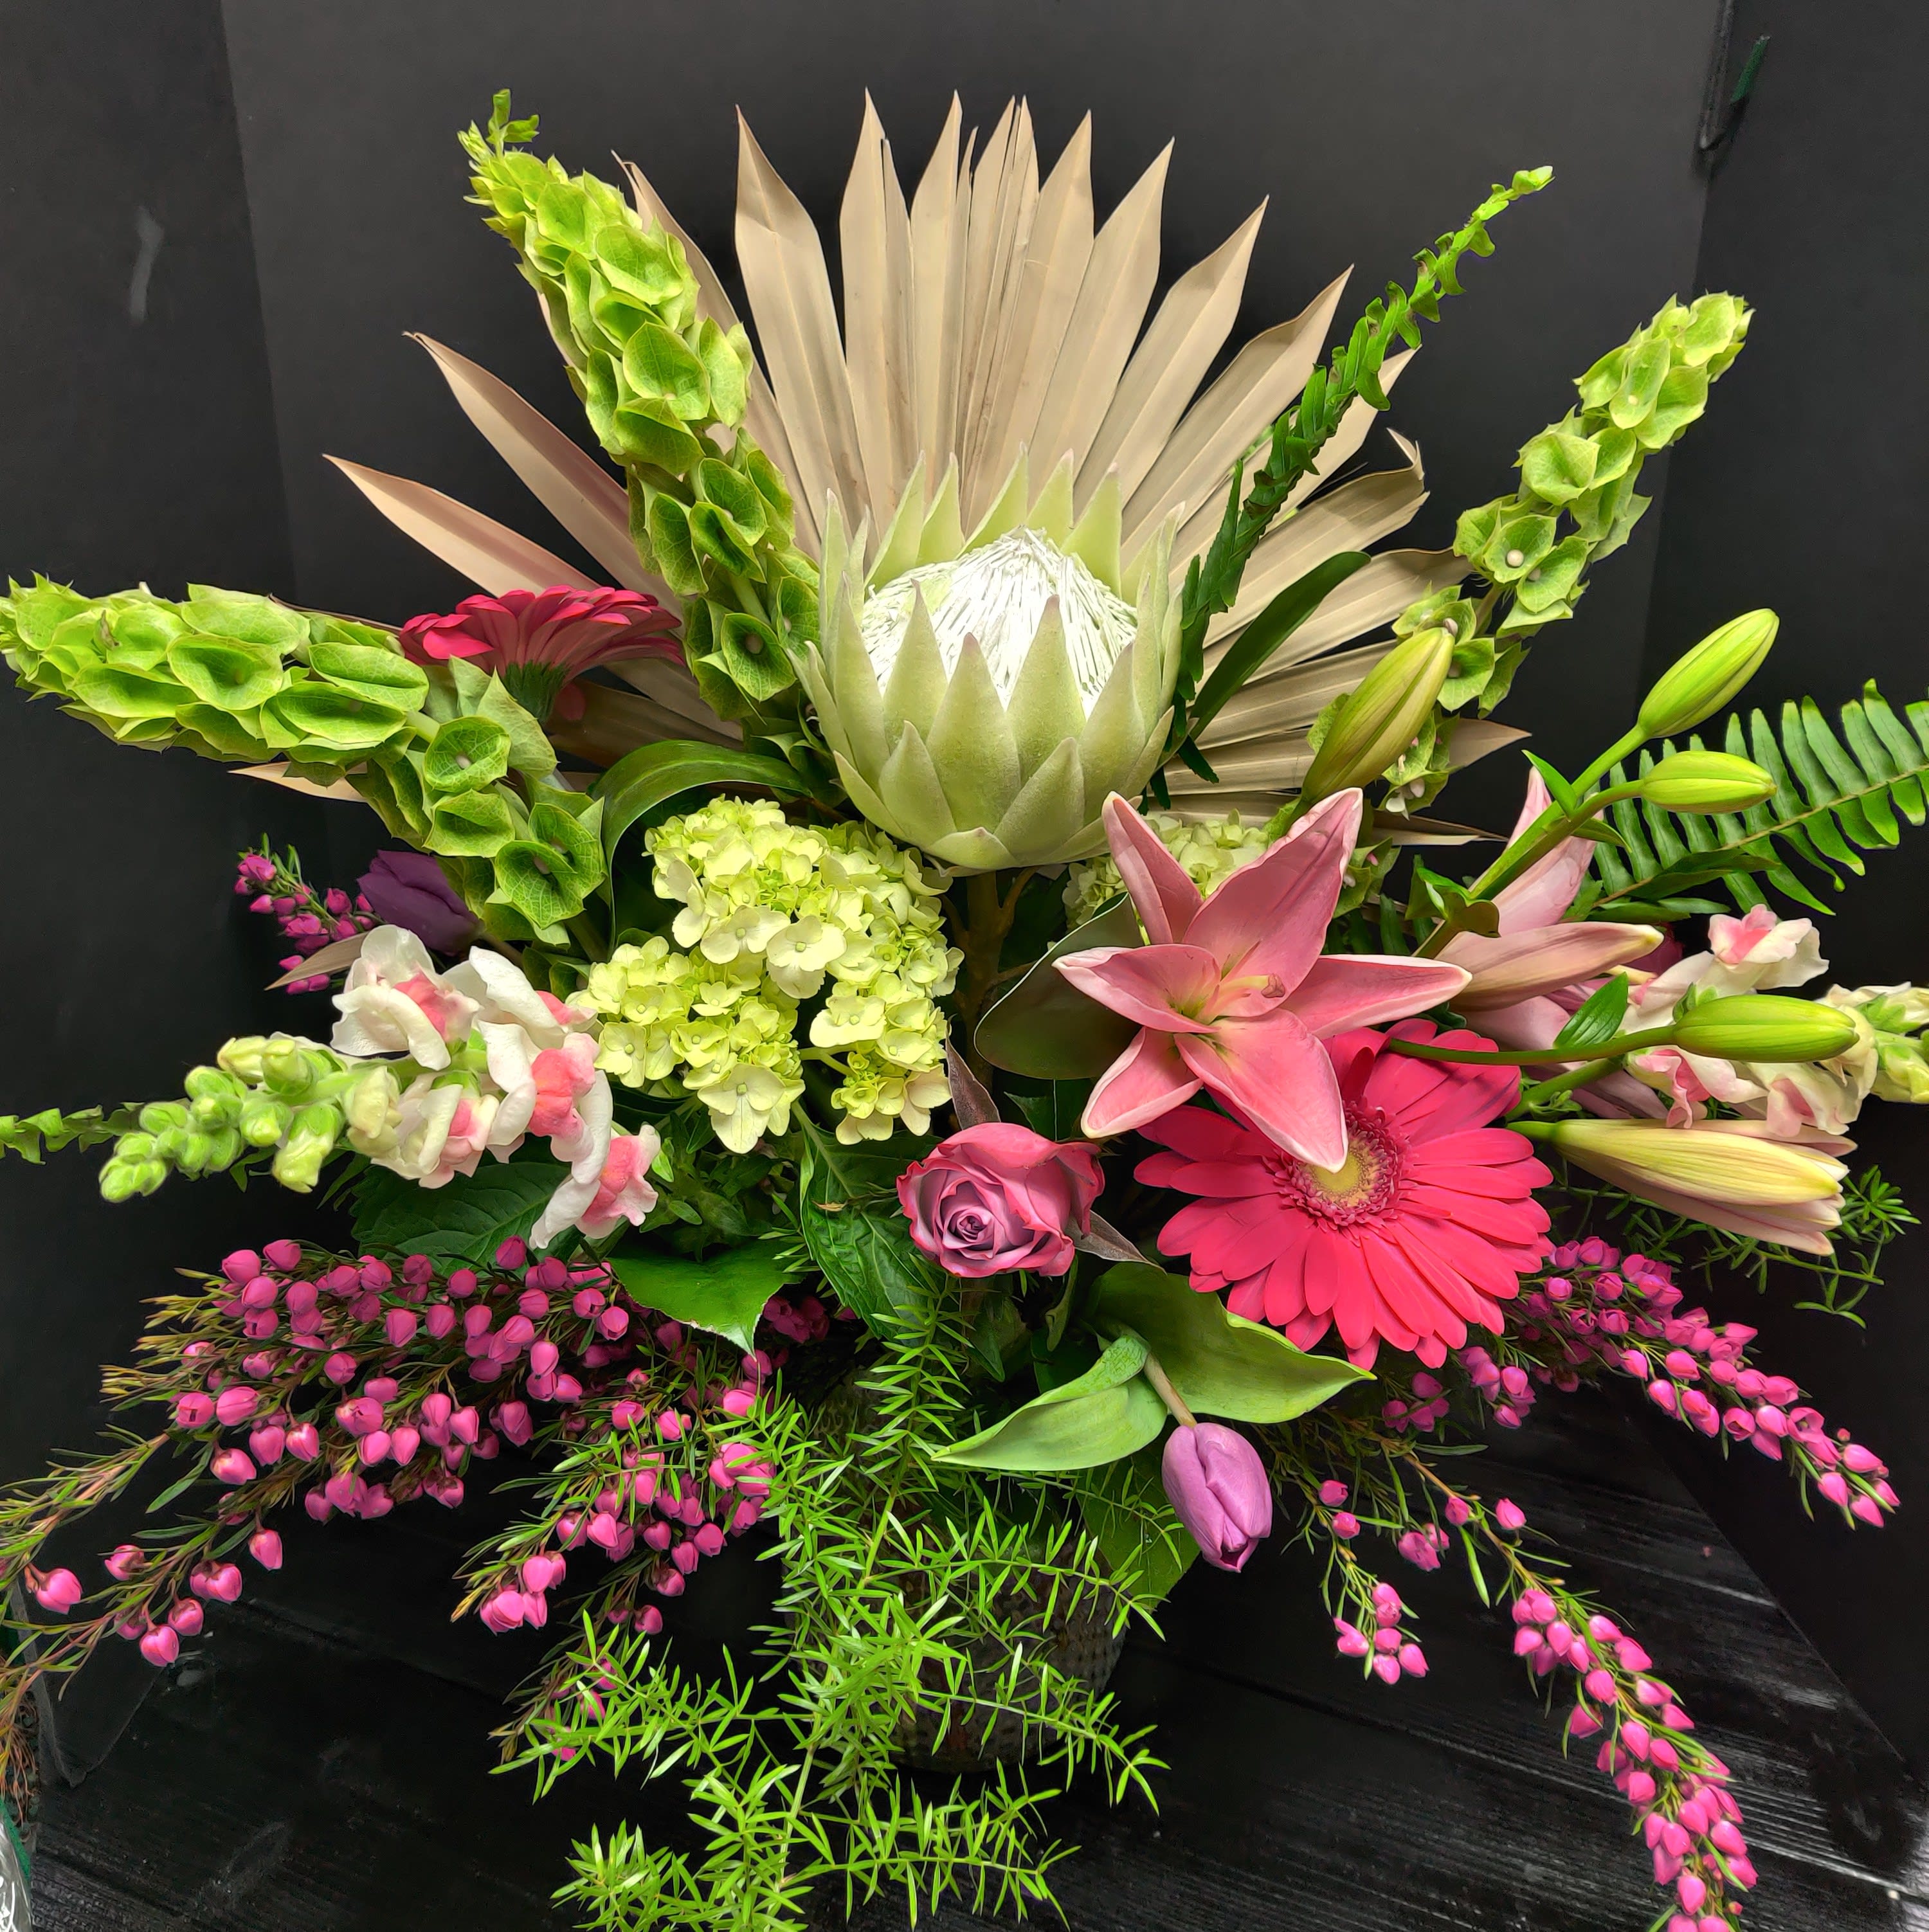 Mom's Everlasting Love - A beautiful arrangement of flowers to suit the best of mom's. With a faux protea in center .